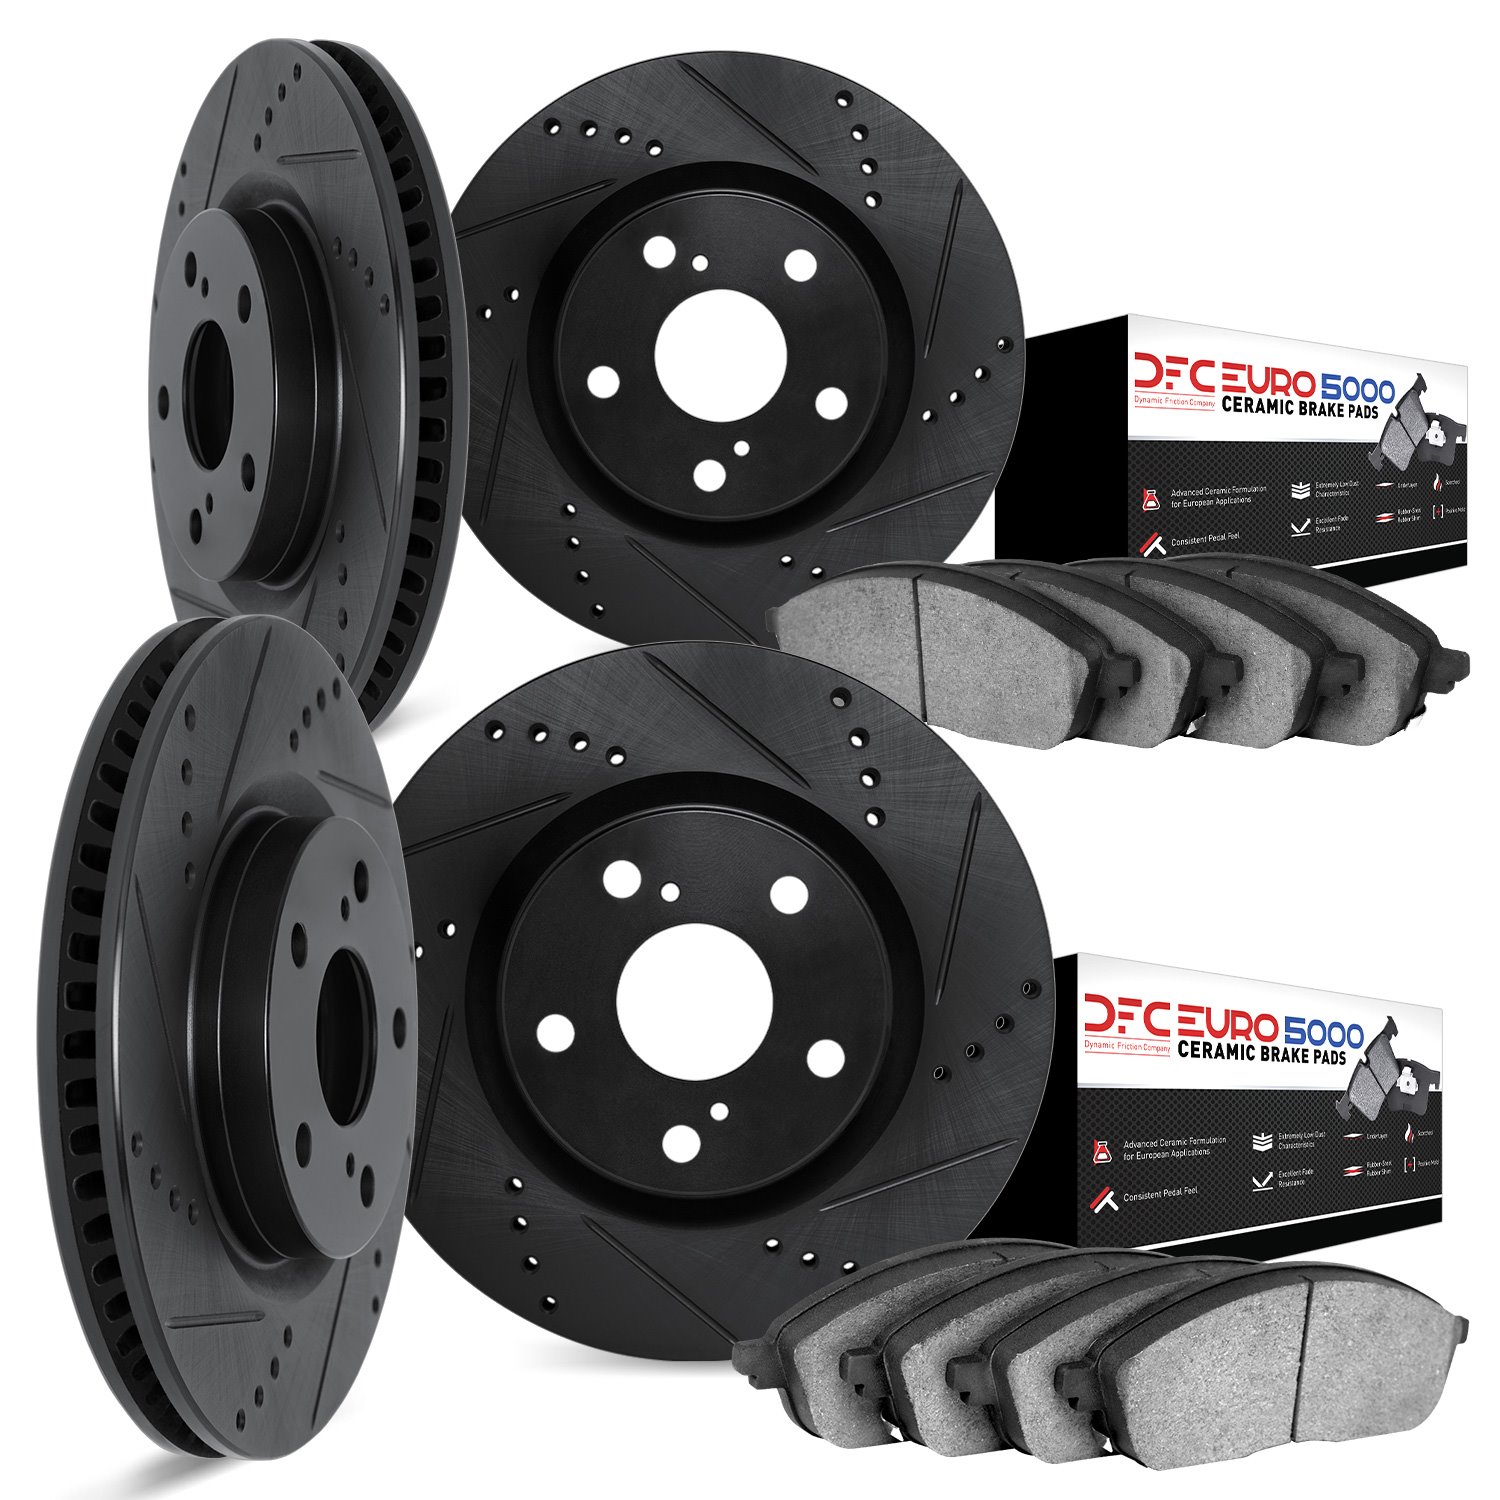 8604-42001 Drilled/Slotted Brake Rotors w/5000 Euro Ceramic Brake Pads Kit [Black], Fits Select Mopar, Position: Front and Rear